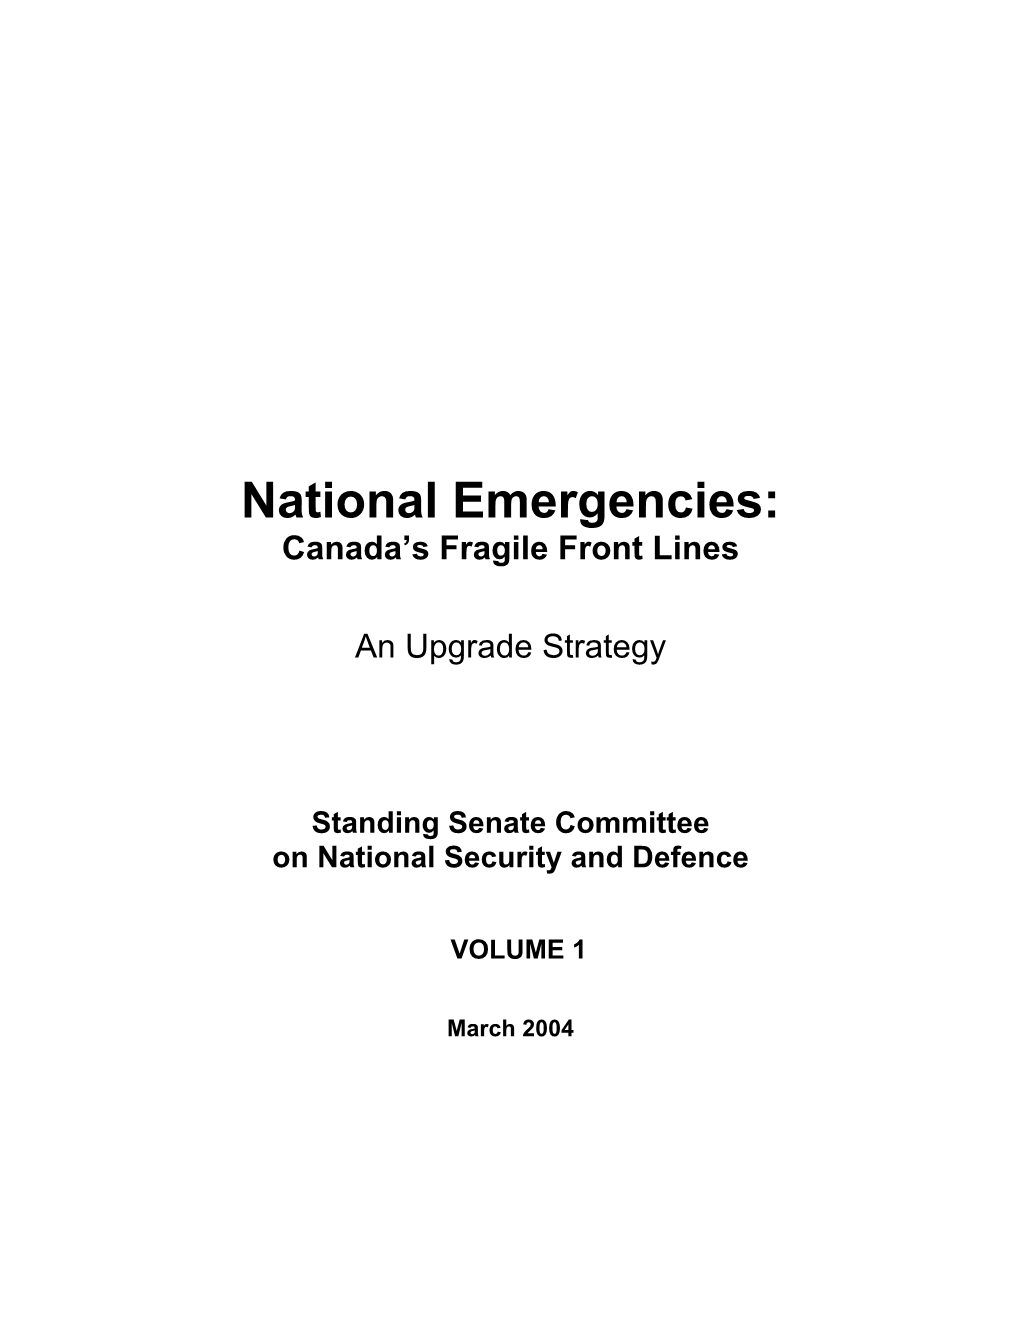 National Emergencies: Canada’S Fragile Front Lines